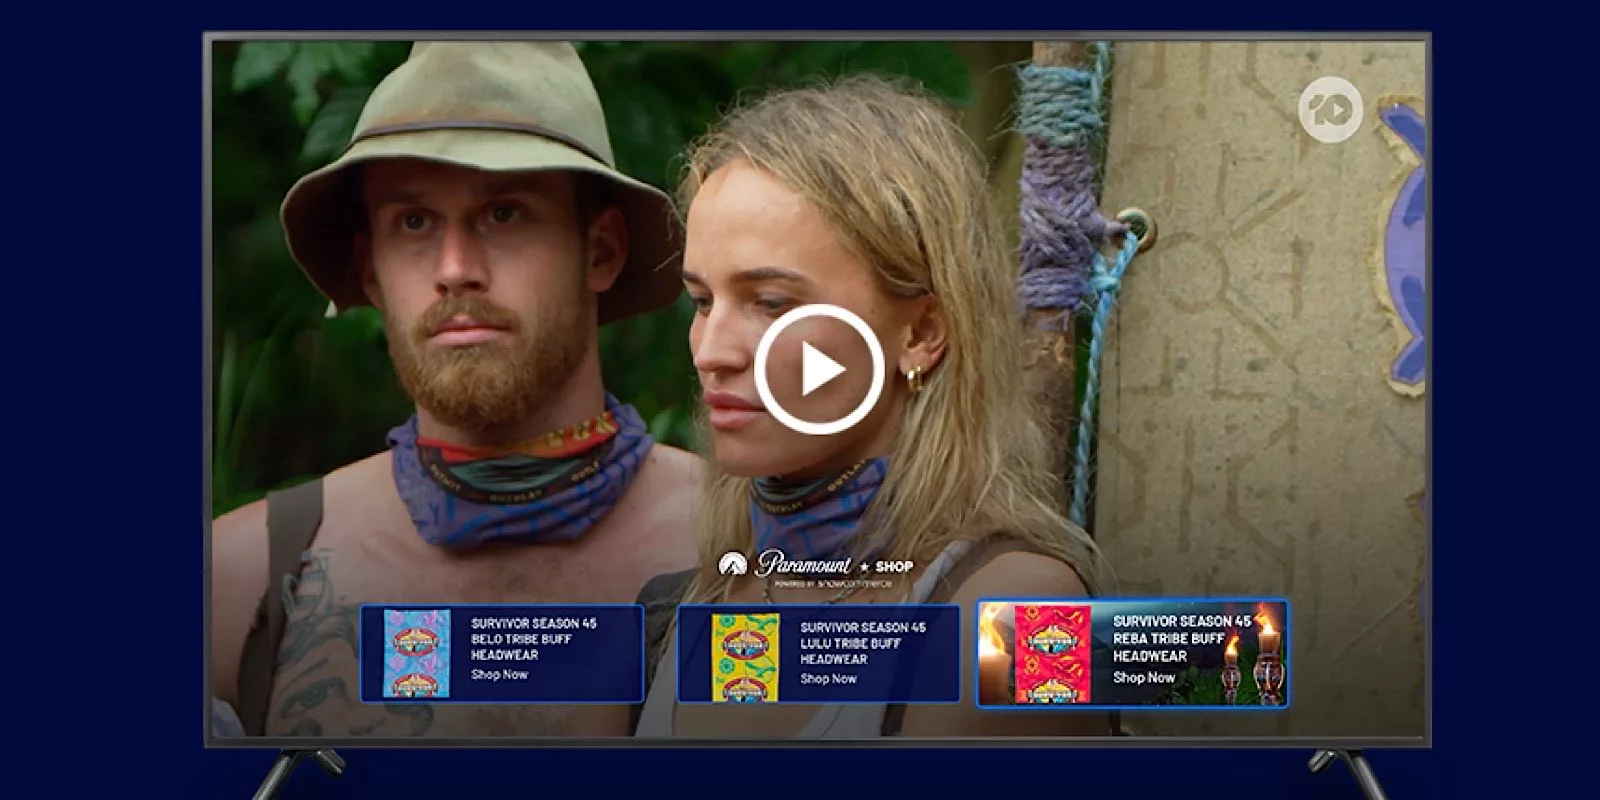 How Paramount will turn Survivor into a shopping service of sorts